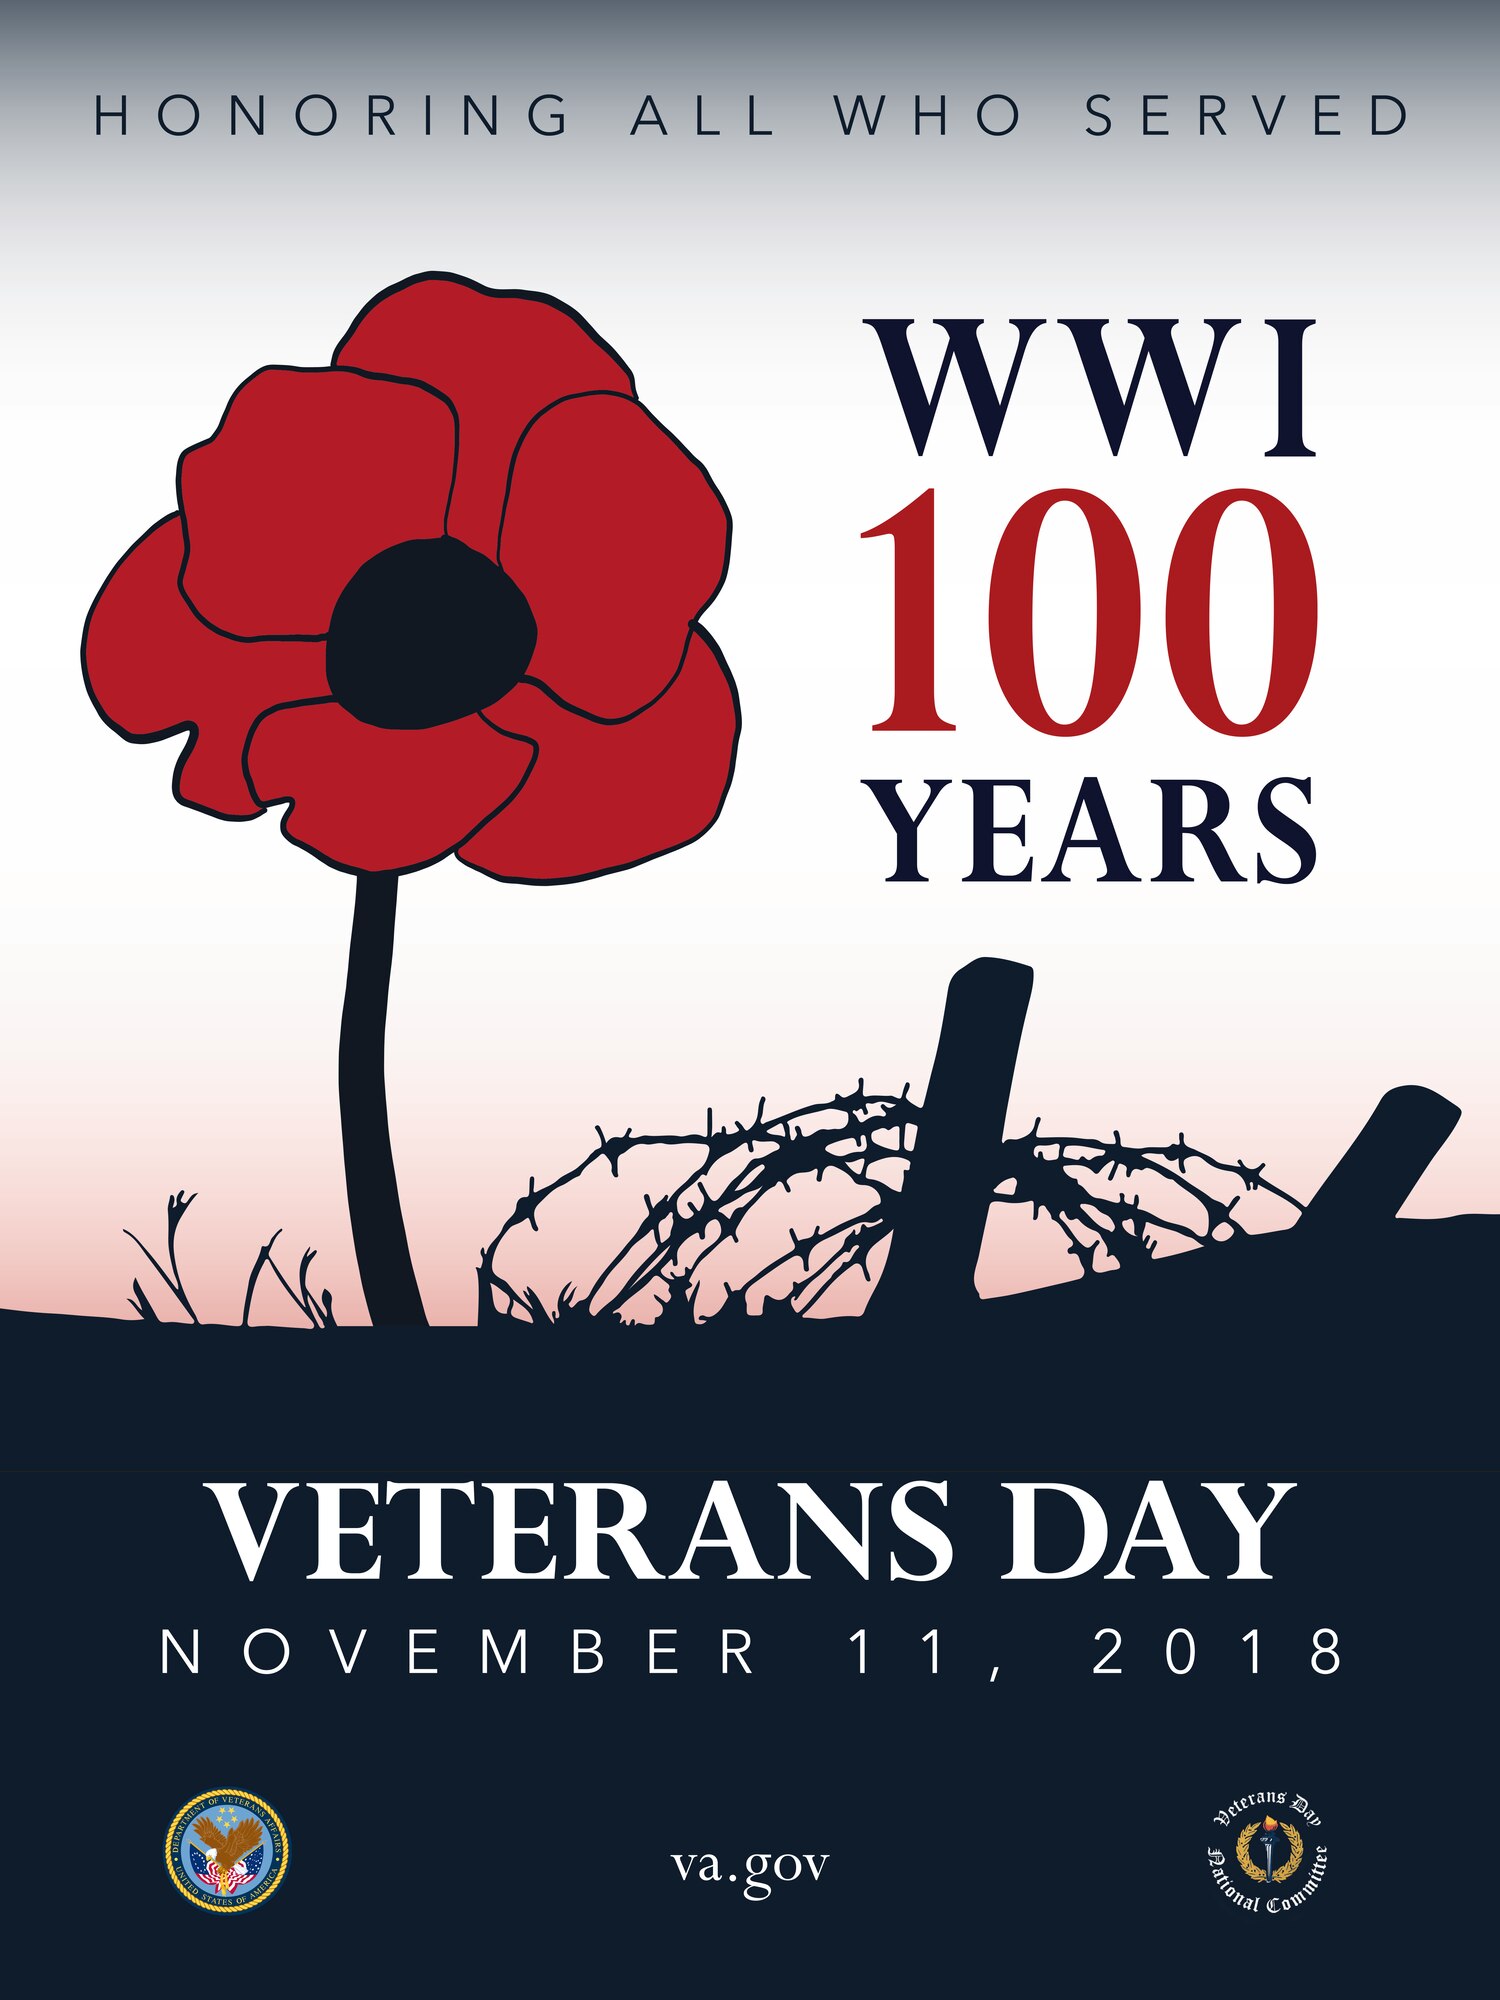 2018 marks the Centennial Commemoration of the end of World War I on November 11, 1918. The theme for the 2018 Veterans Day Poster is: “The War to End All Wars” and features a poppy and barbed wire.